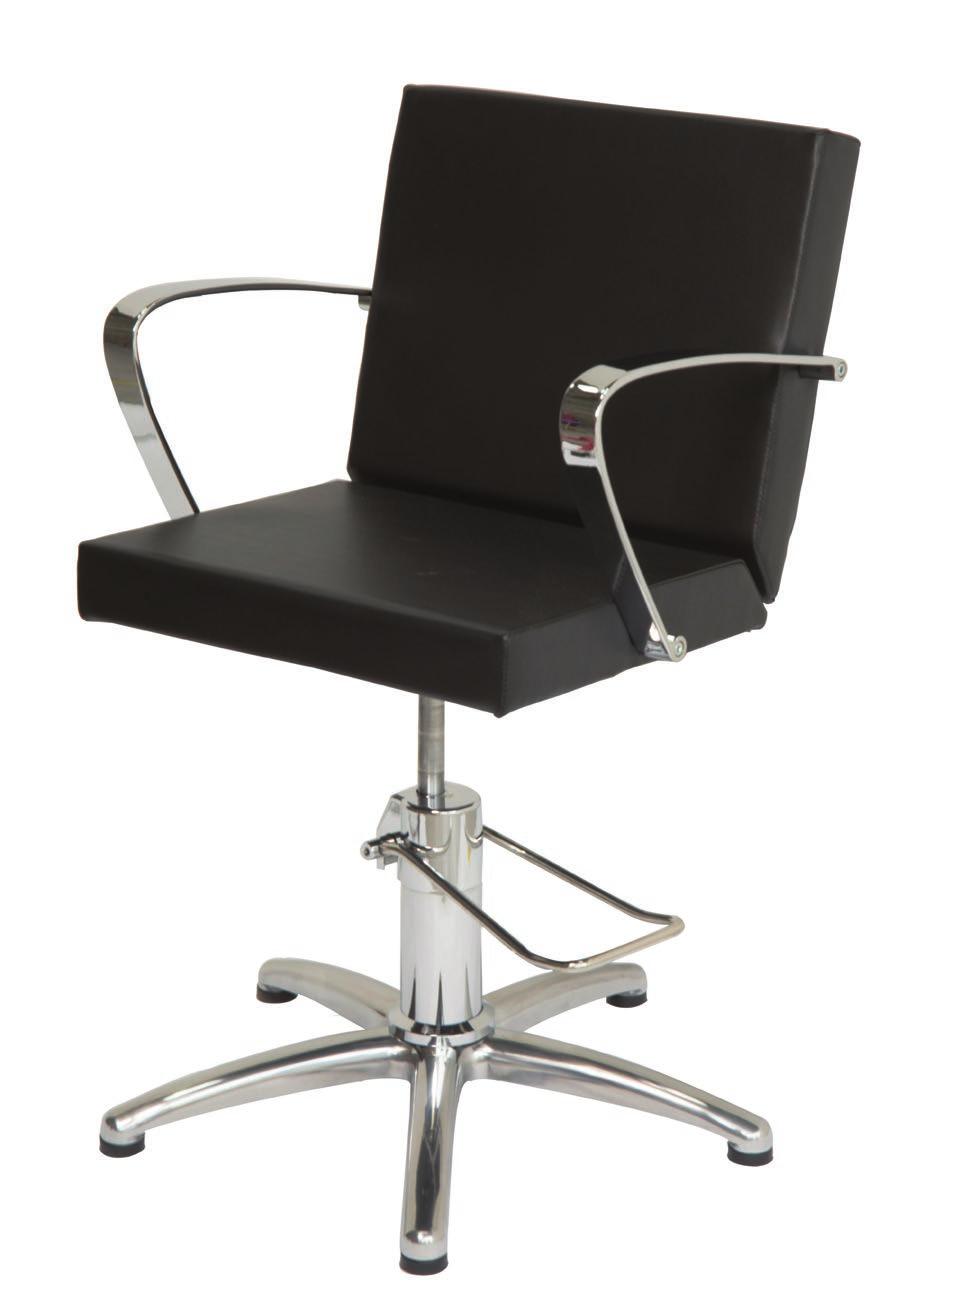 TREATMENT SEATING Carna ENT/Ophthalmic Chair The versatile chair is suitable for many departments across the hospital.